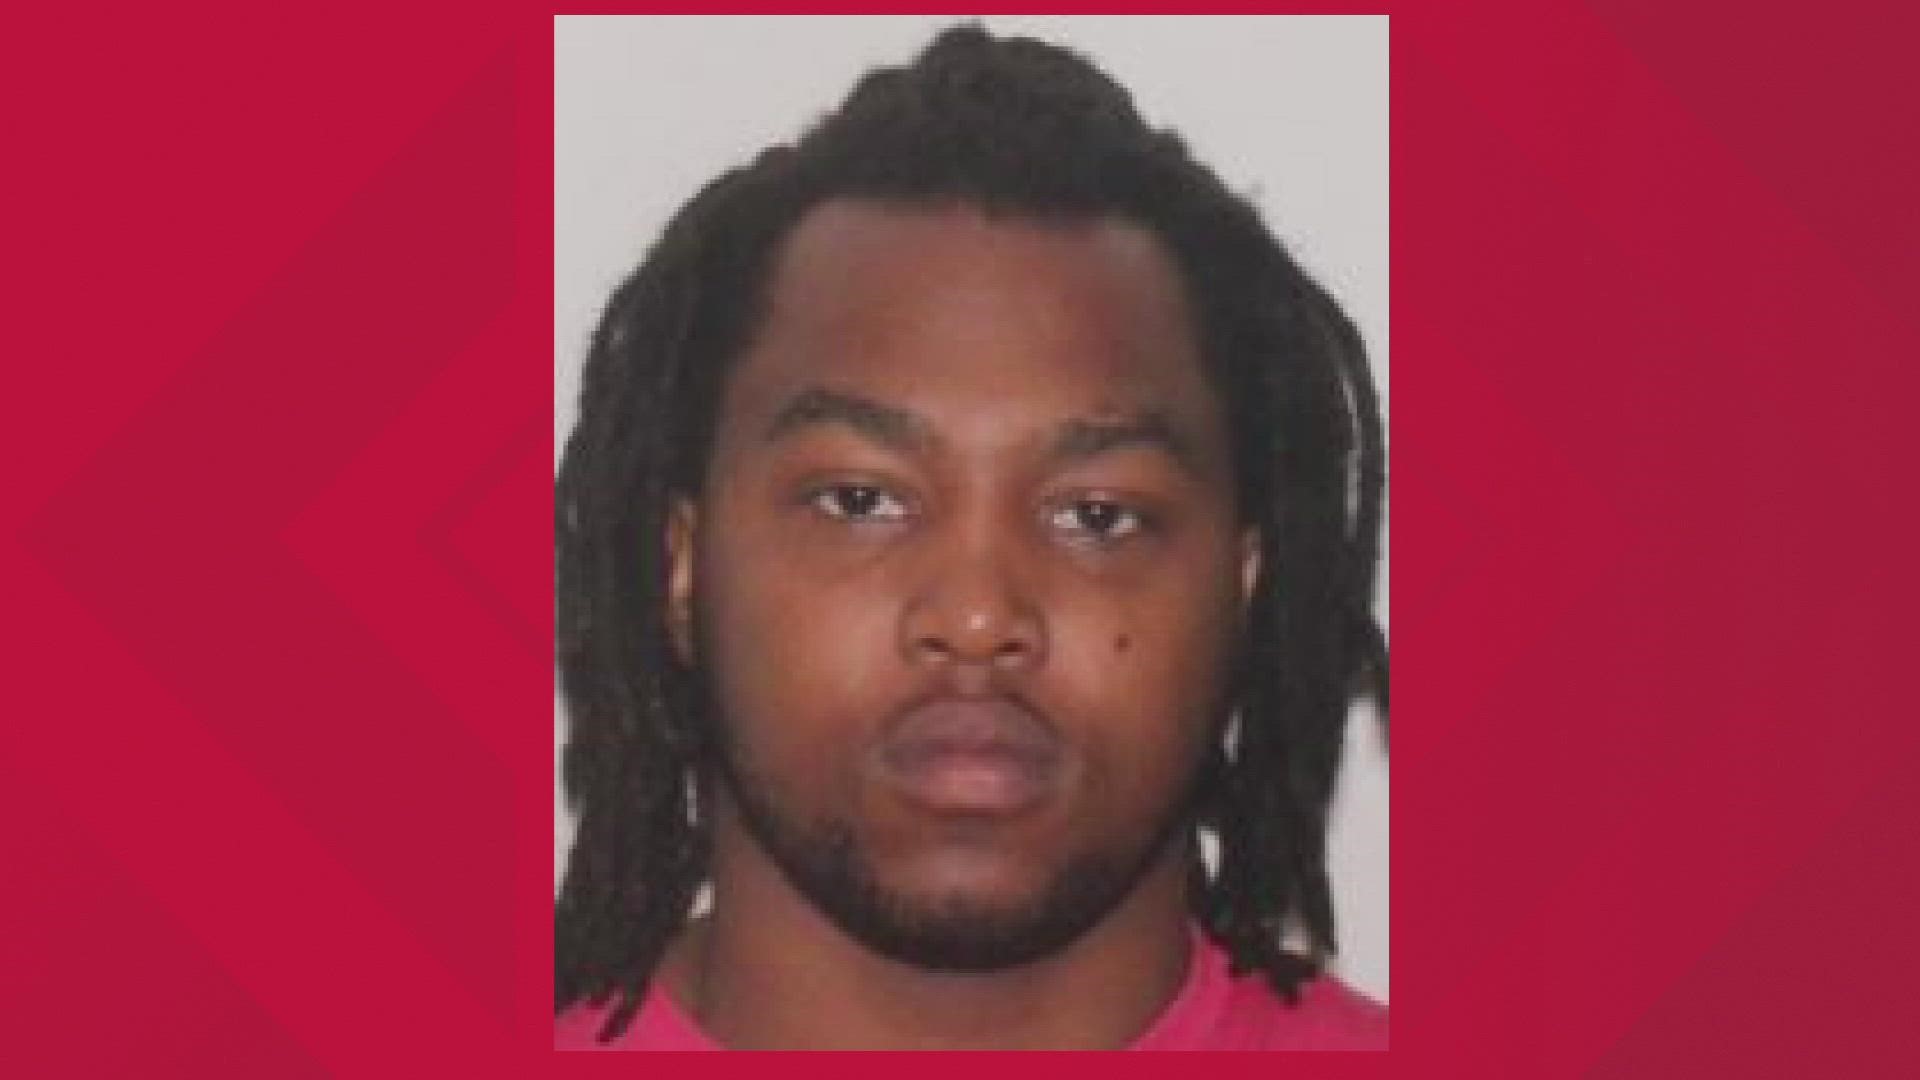 Investigators say Rodgers is wanted for murder and attempted murder.